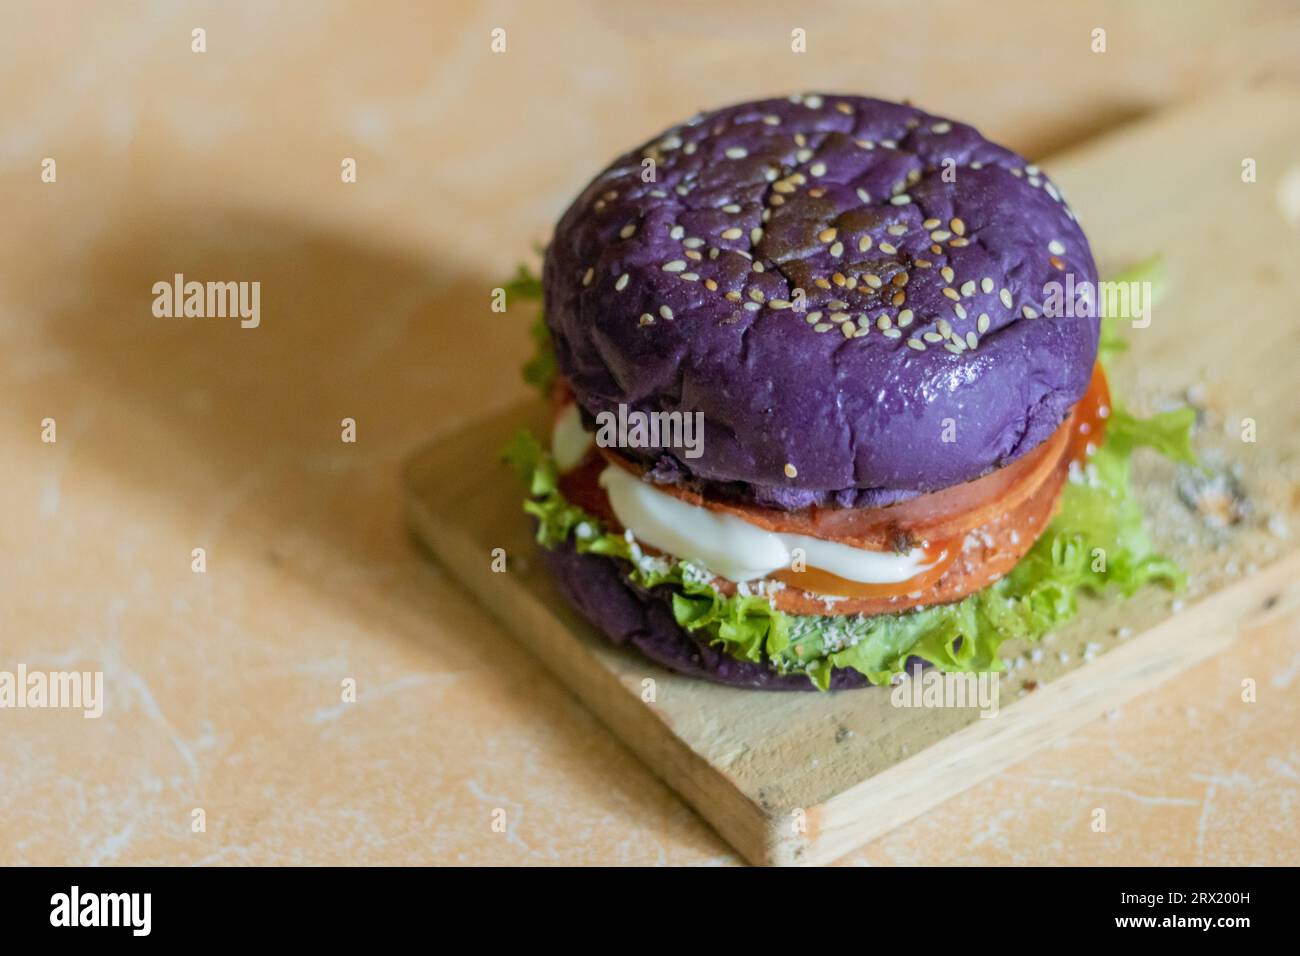 close up photo of a home-made purple burger placed on a ceramic table. Hamburger. Fast Food. Culinary Stock Photo